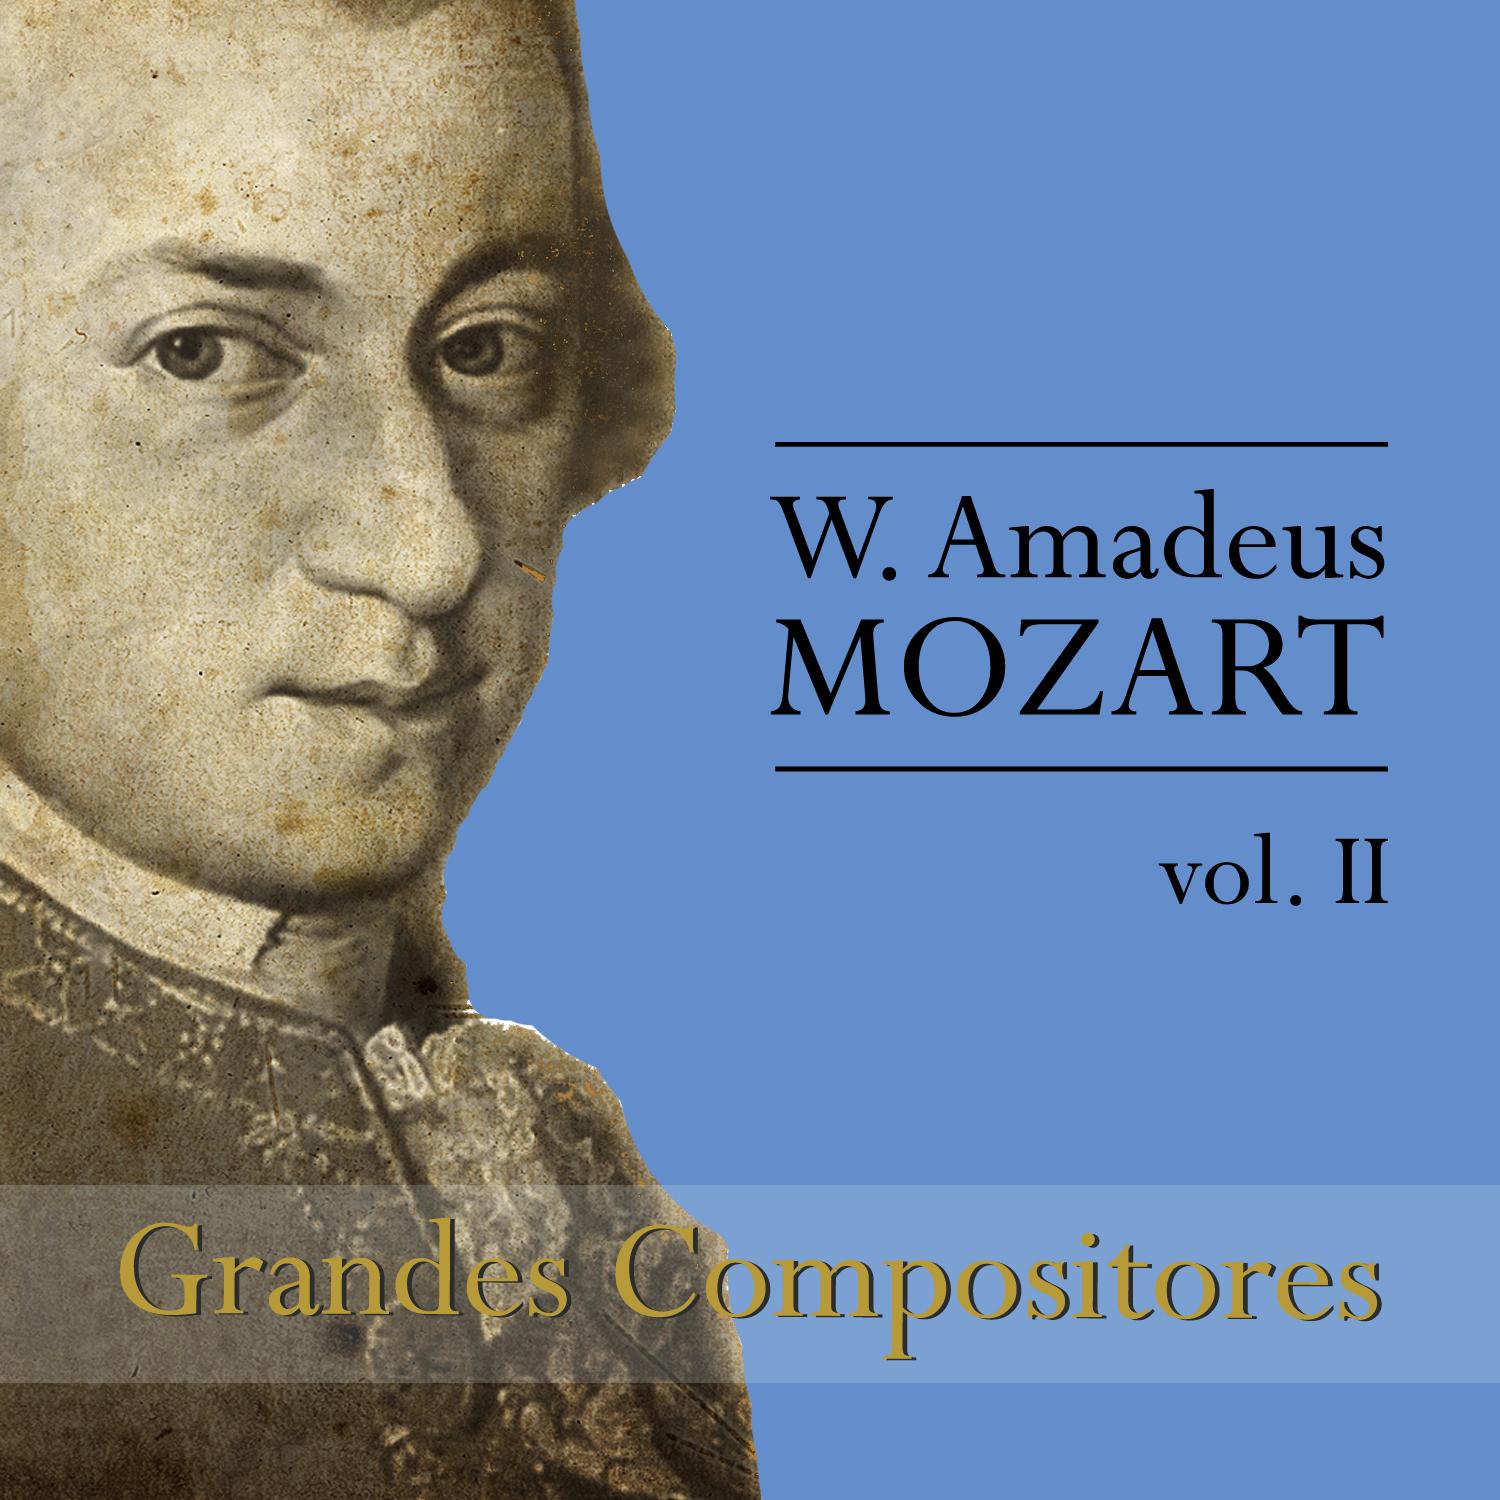 Concerto for Clarinet and Orchestra in A Major, K. 622: I. Allegro